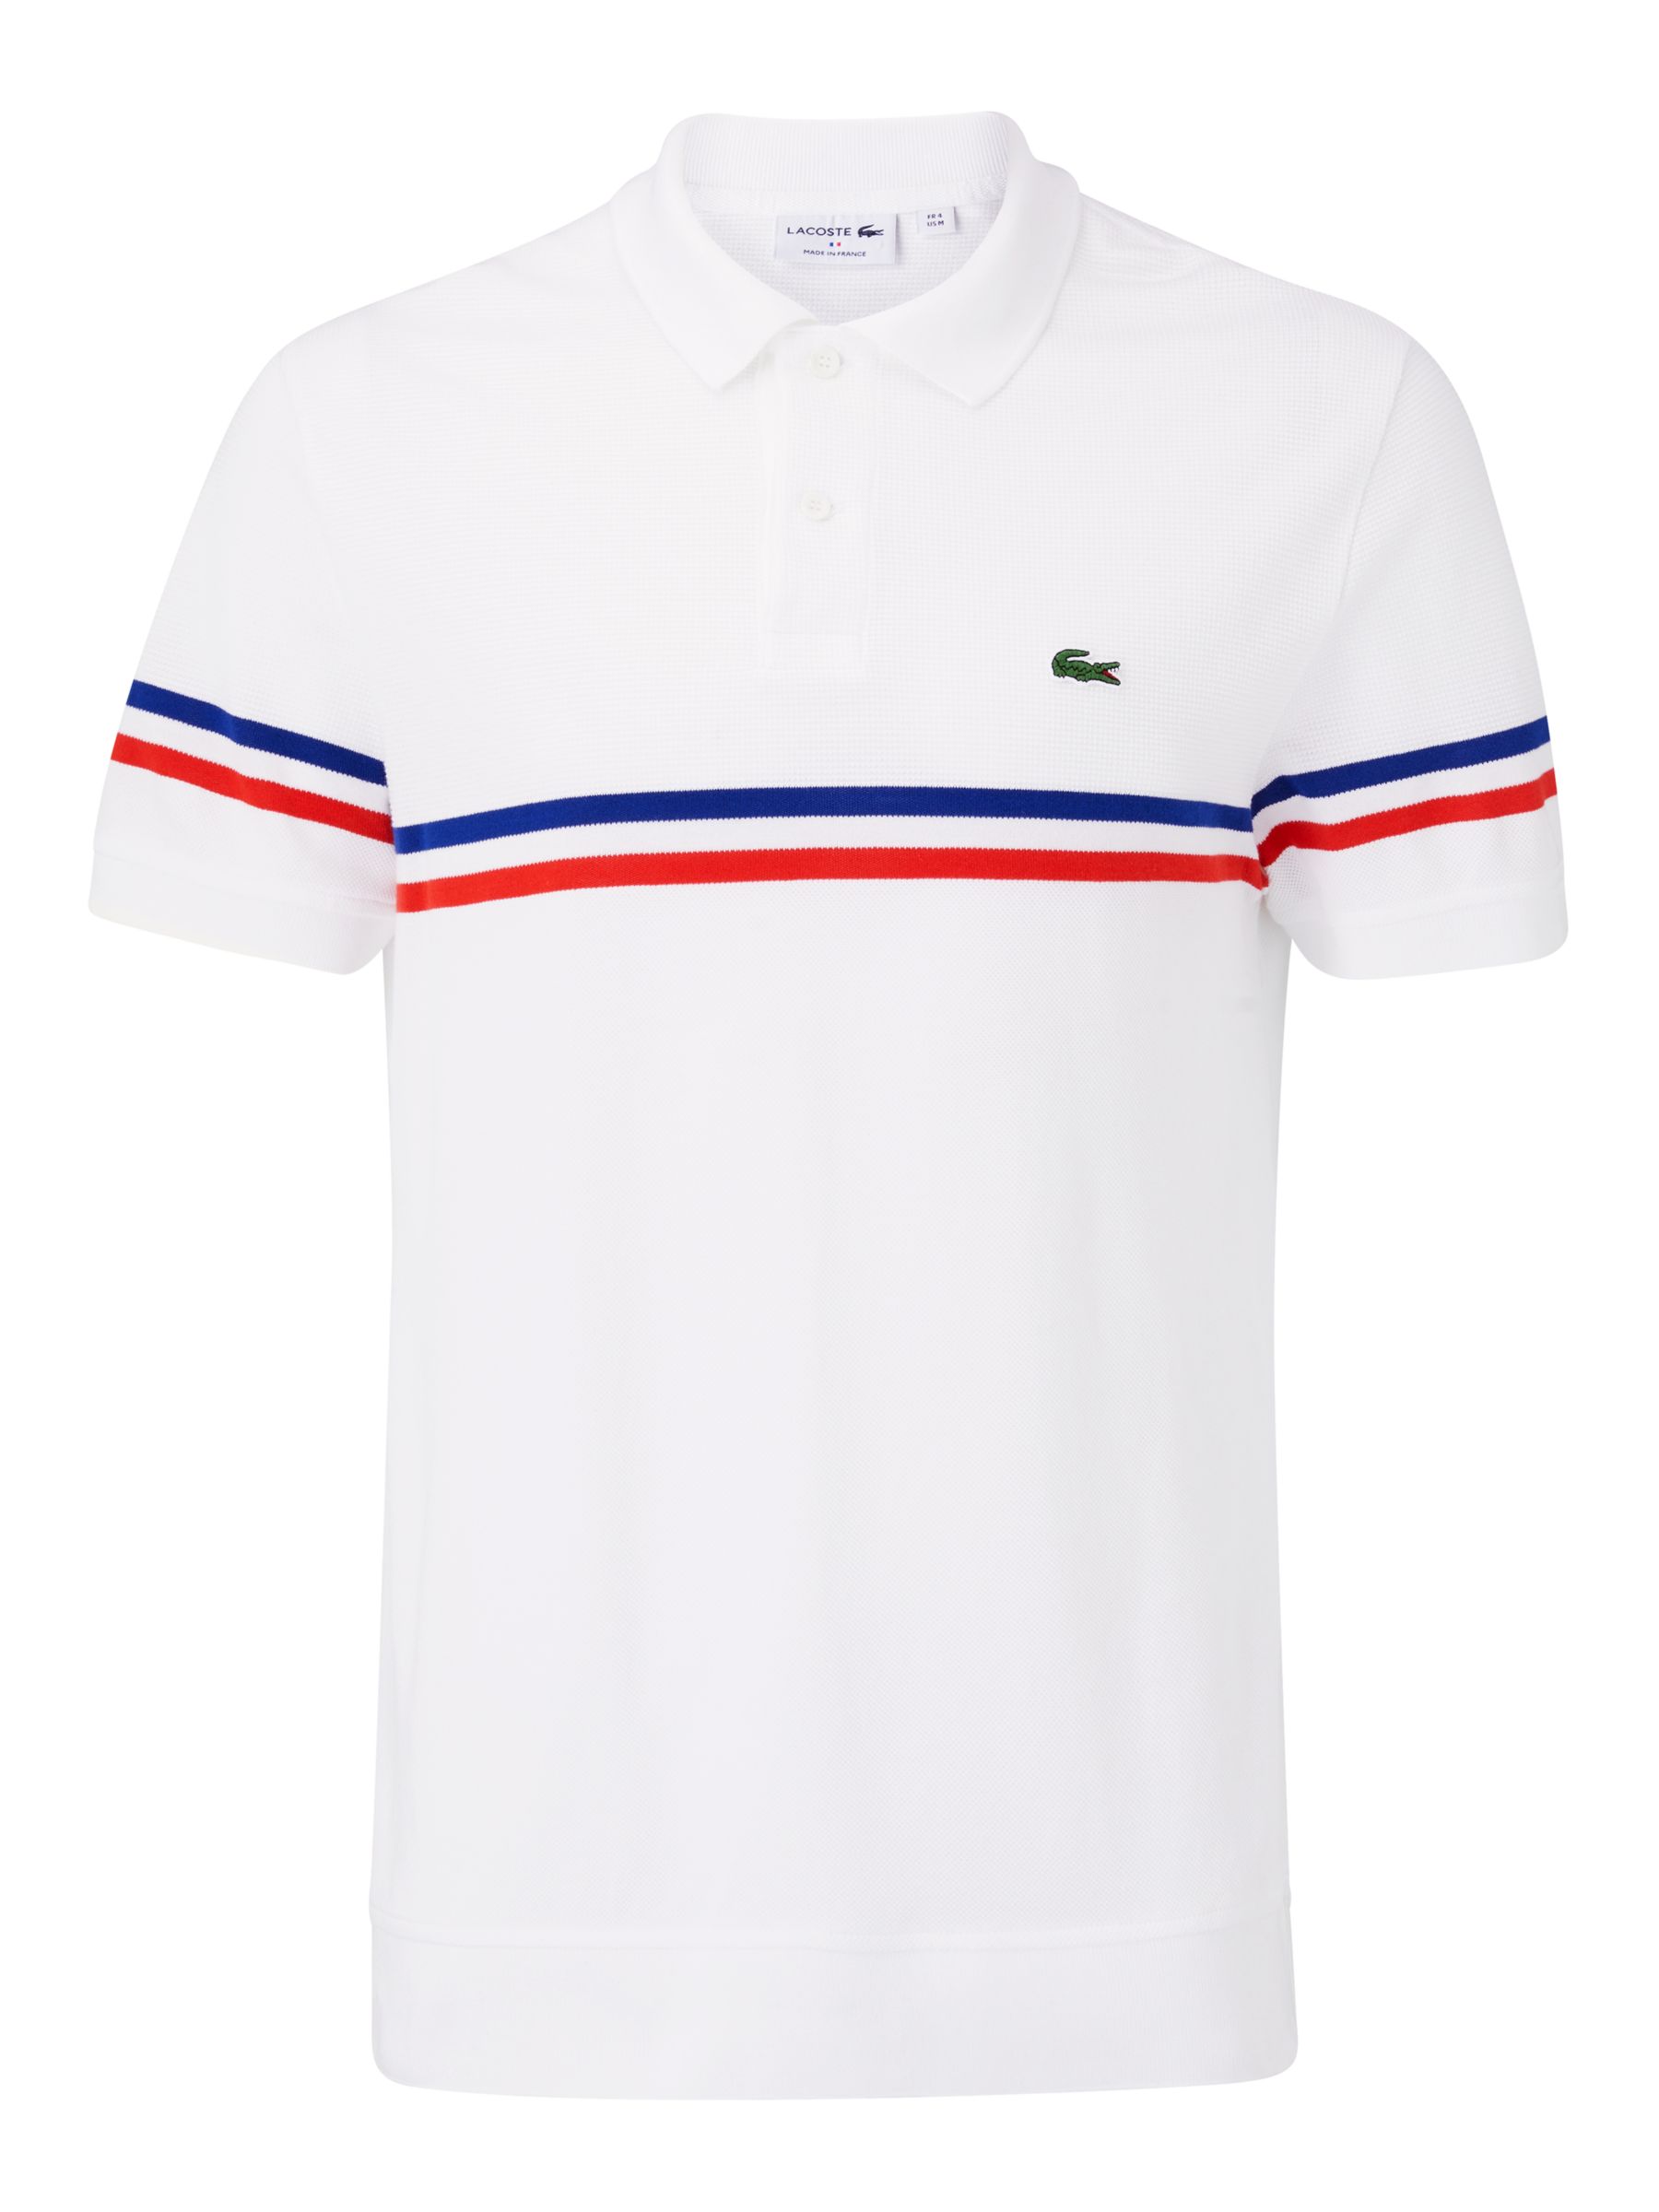 lacoste polo shirt made in france